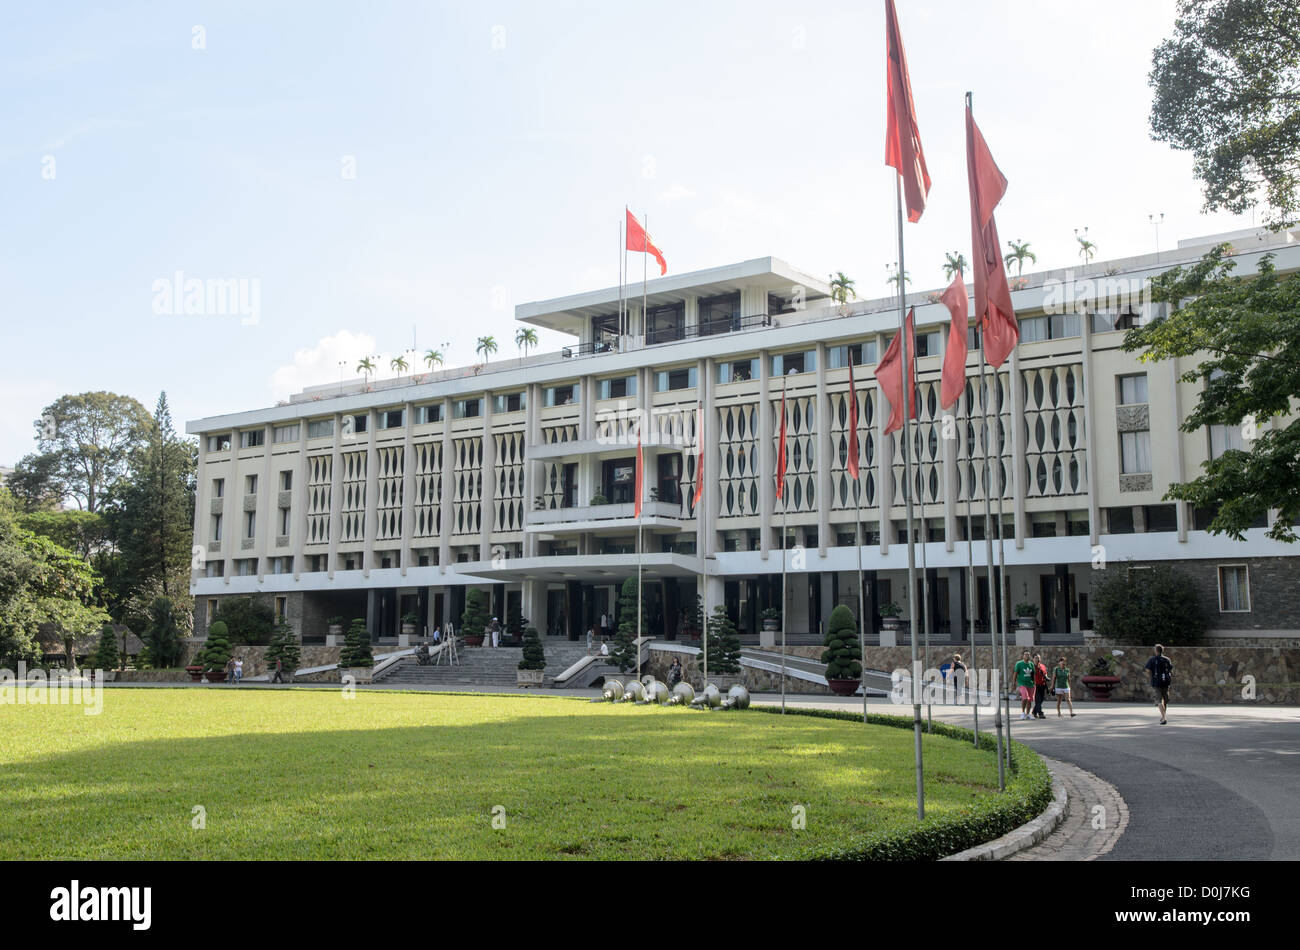 HO CHI MINH CITY, Vietnam - Reunification Palace (the former Presidential Palace) in downtown Ho Chi Minh City (Saigon), Vietnam. The palace was used as the command headquarters of South Vietnam during the Vietnam War. Stock Photo